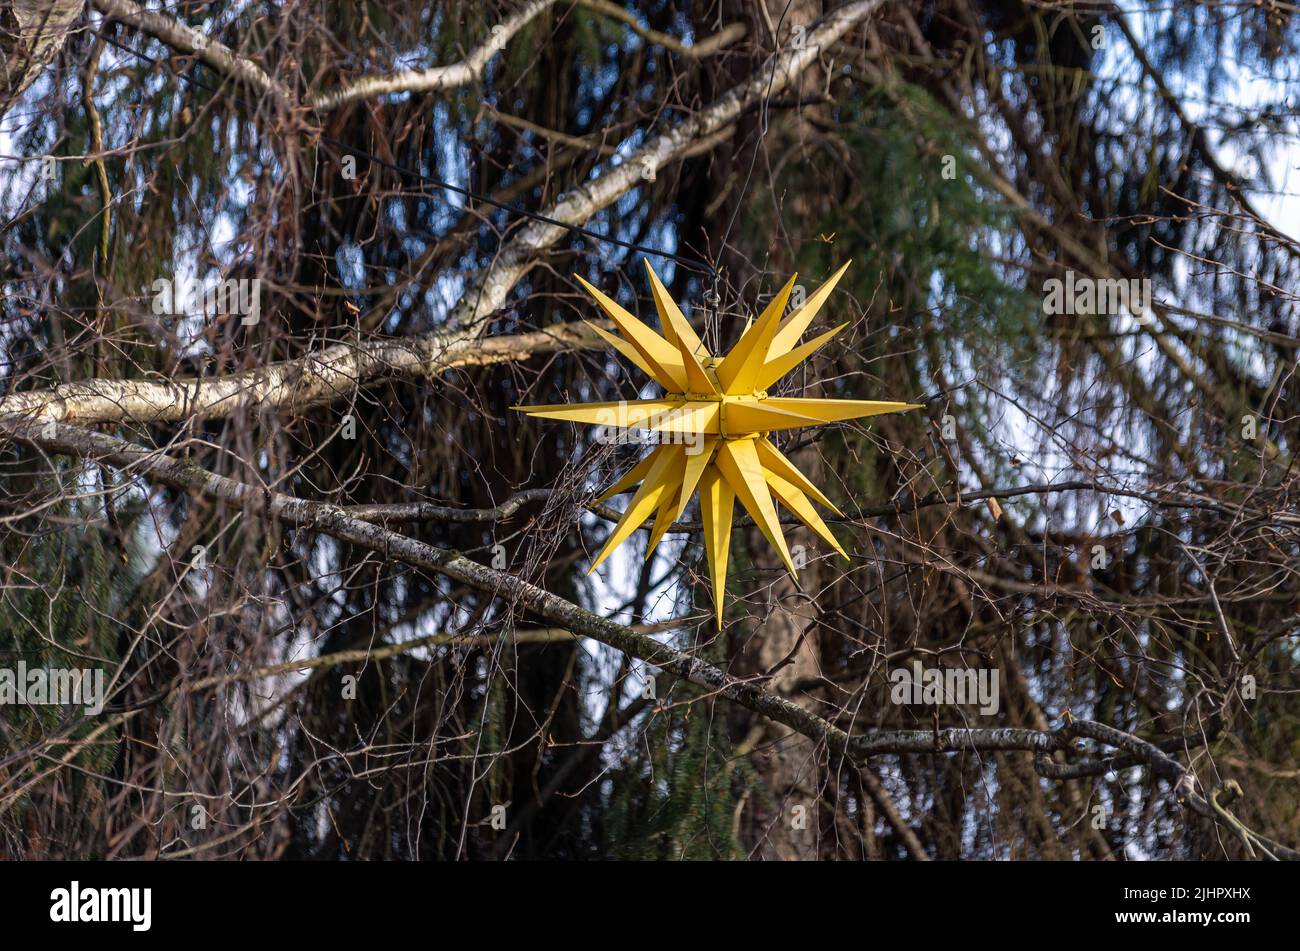 A Moravian star is hung up in a tree for lighting at Christmas time. Stock Photo